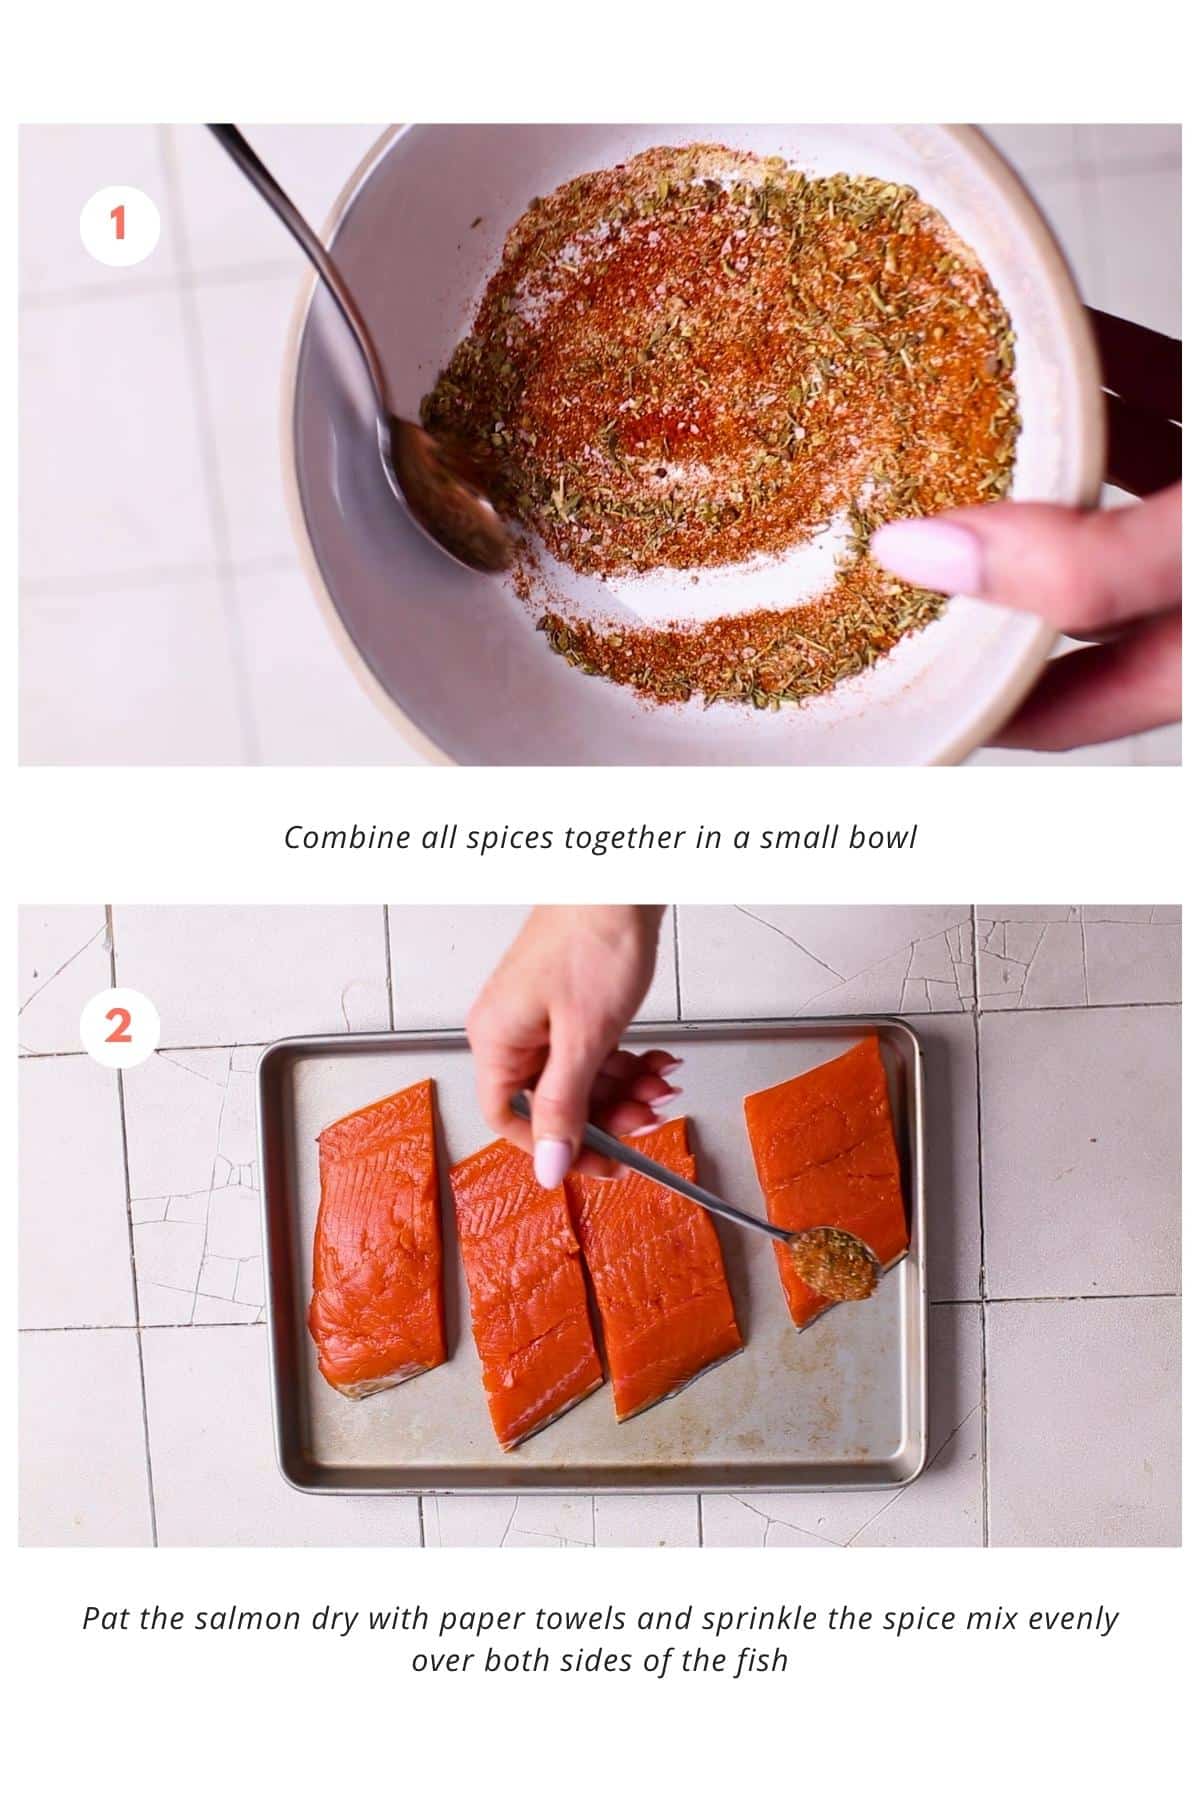 The spices are mixed together in a small bowl. Then, the salmon is patted dry with paper towels and the spice mix is sprinkled evenly over both sides of the fish.